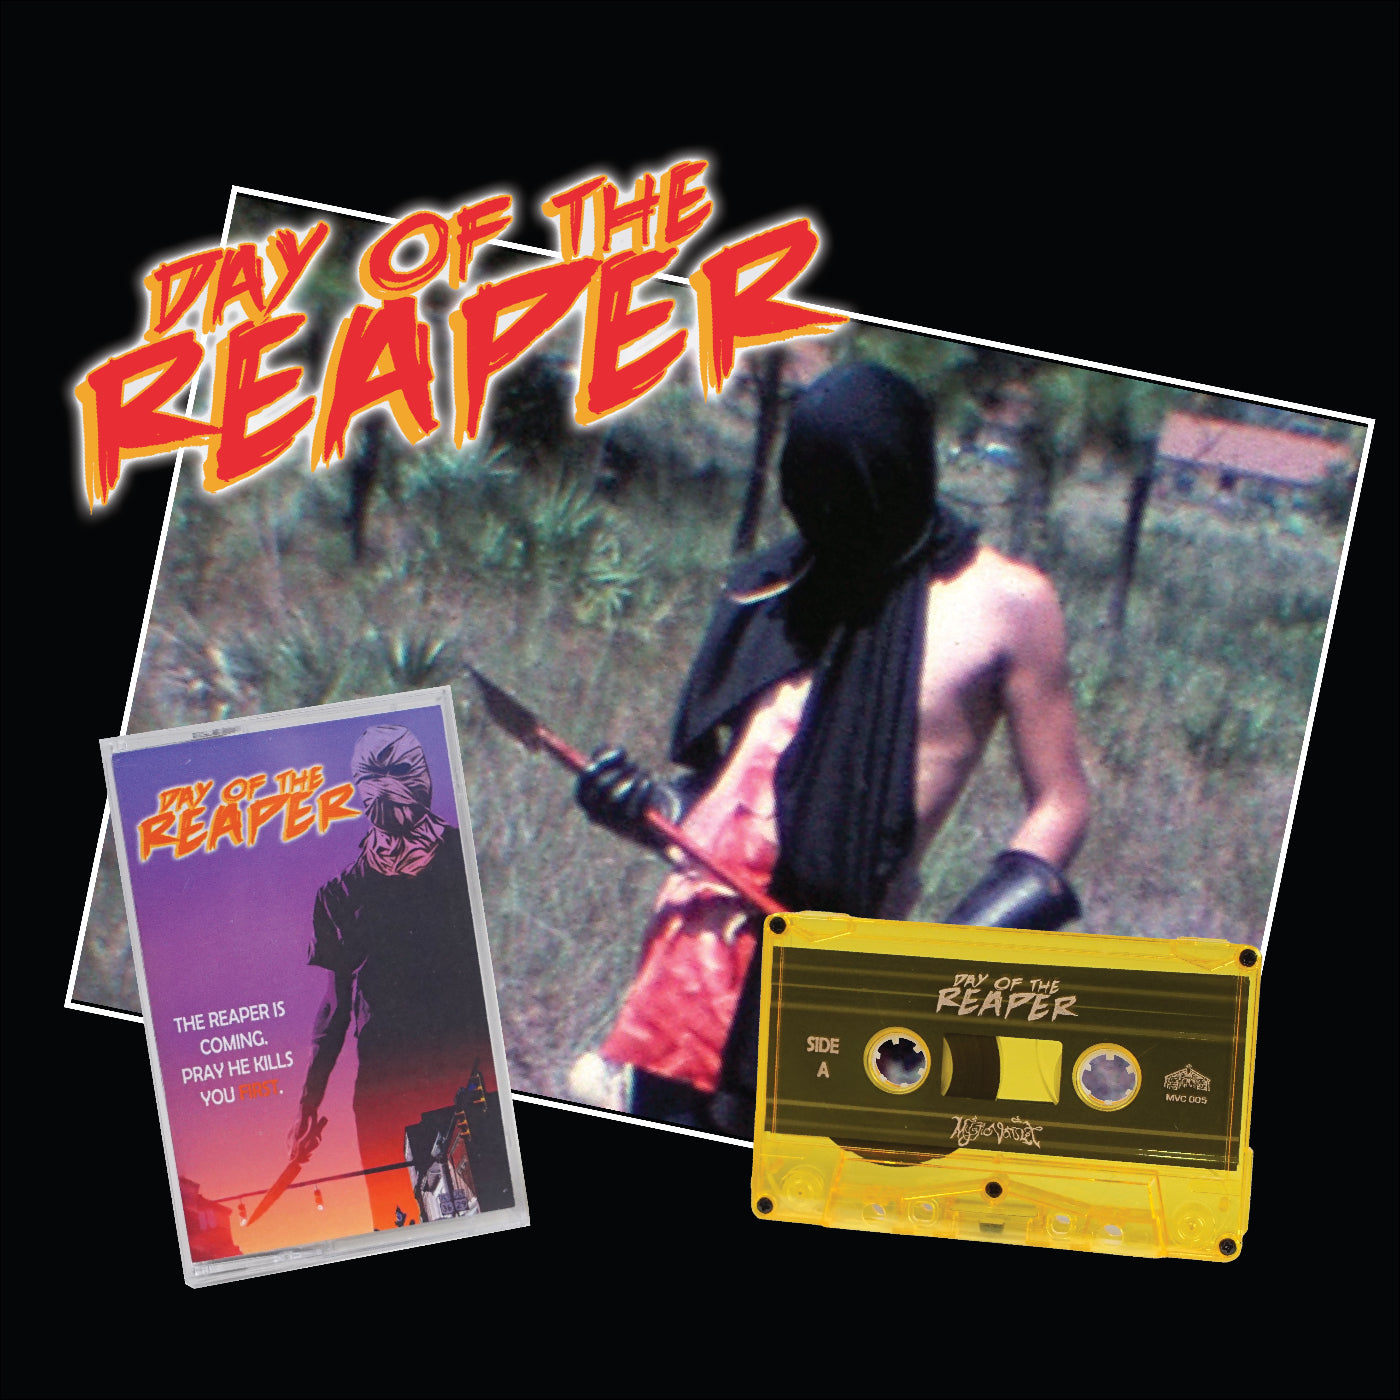 DAY OF THE REAPER 1984 CASSETTE SOUNDTRACK